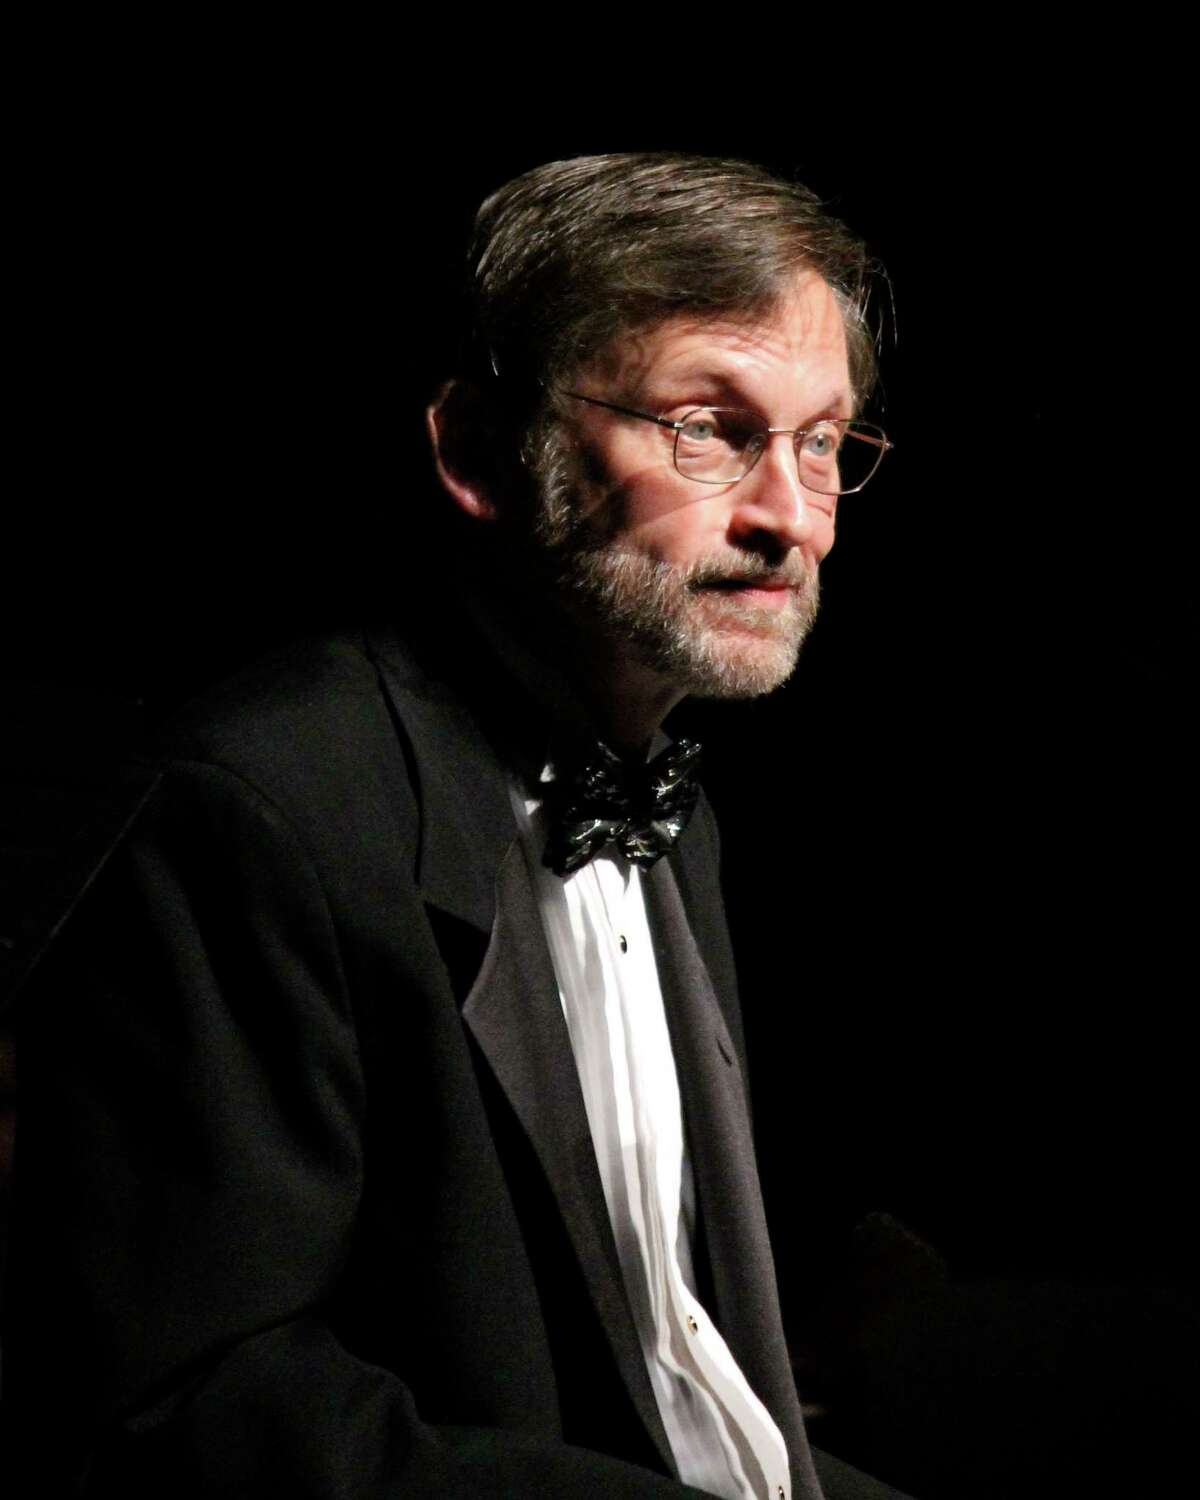 The Torrington Symphony Orchestra, conducted by Maurice Steinberg, pictured, is holding its holiday concert at the Warner's Nancy Marine Studio Theatre at 7:30 p.m. Dec. 18.